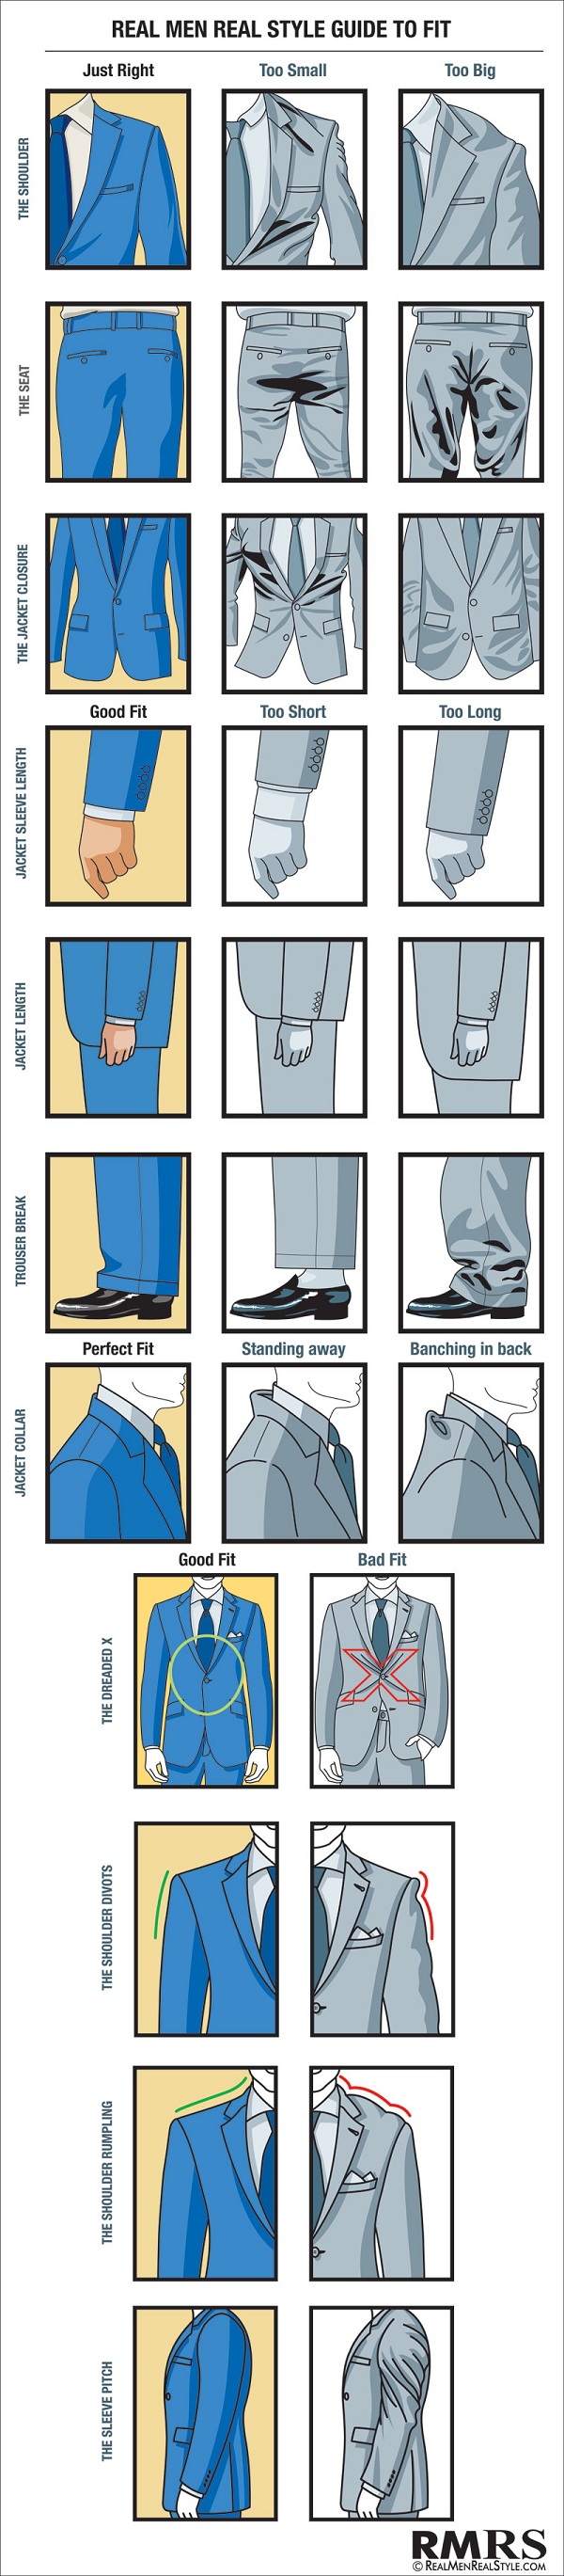 Bull Proper Fit Infographic 1-22-14